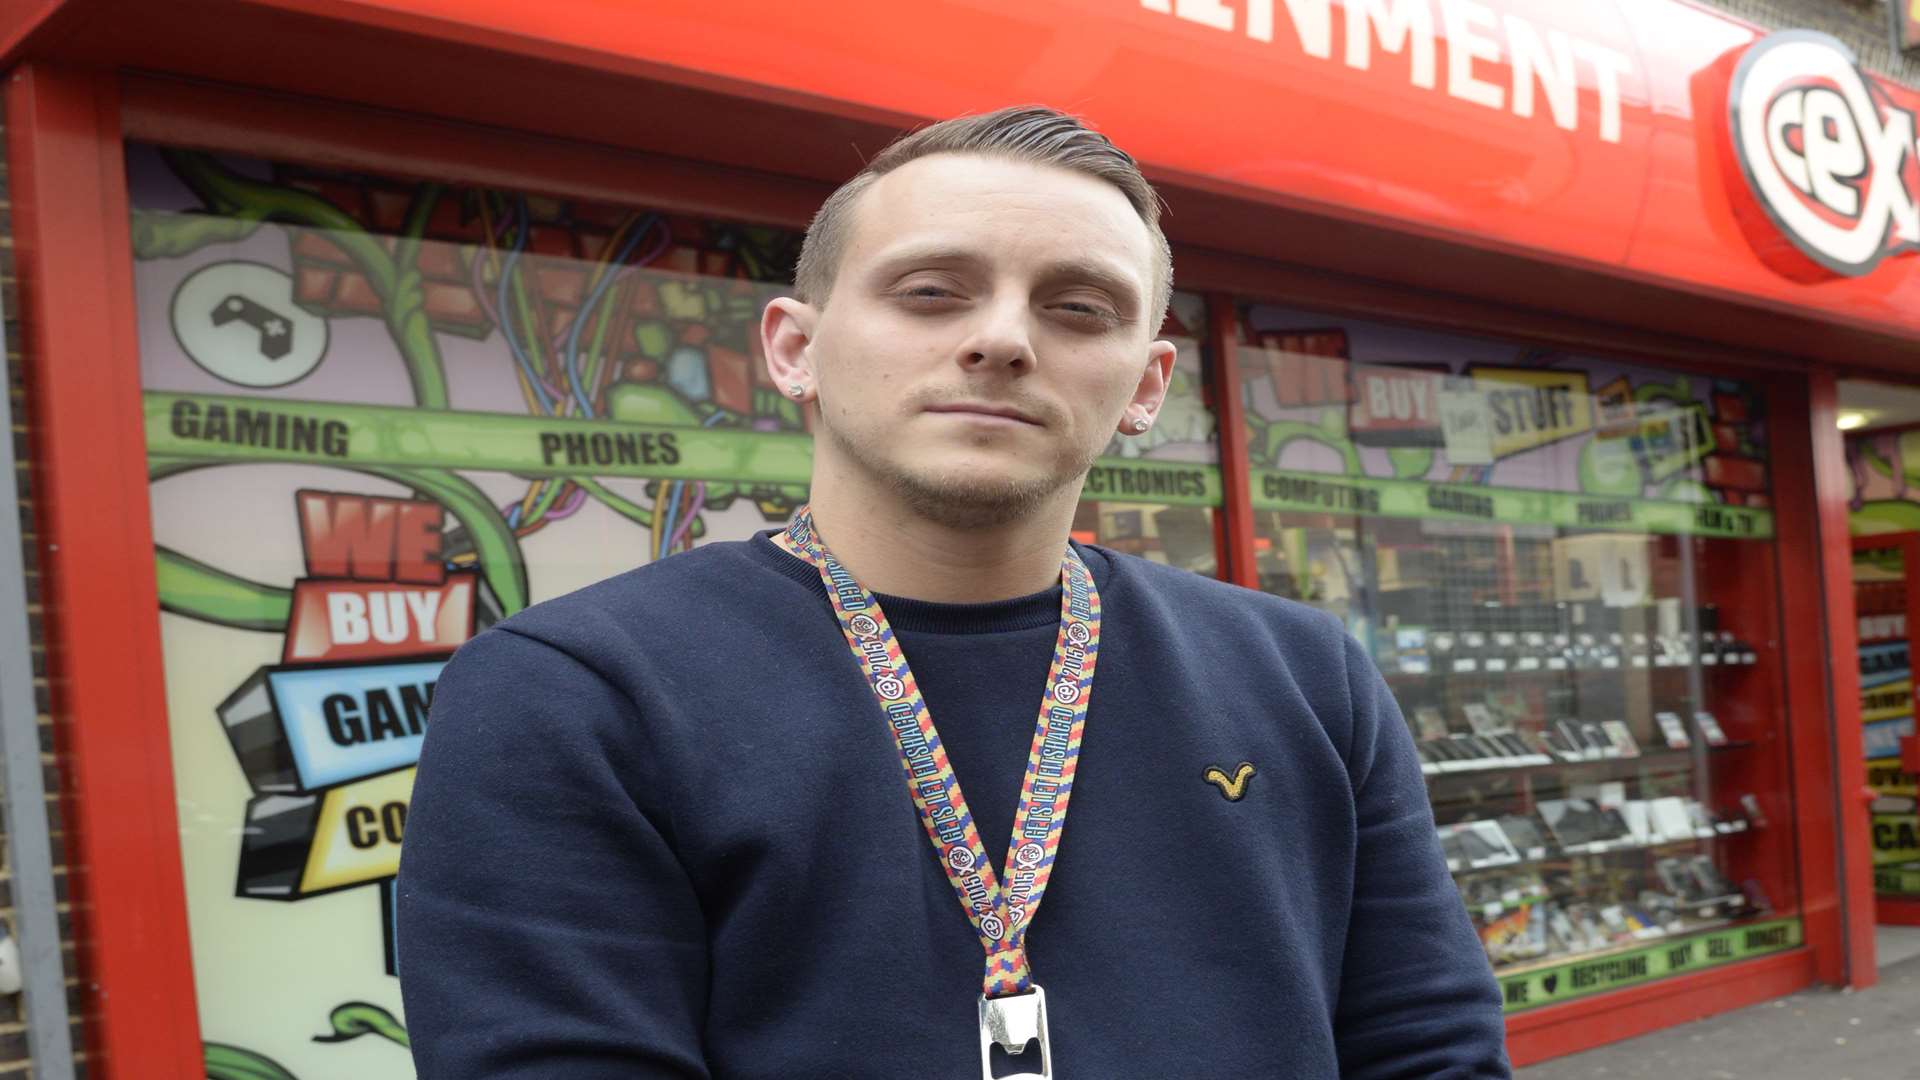 CEX boss Russell Mayes, who found a bolt in his drink at McDonald's in Dover